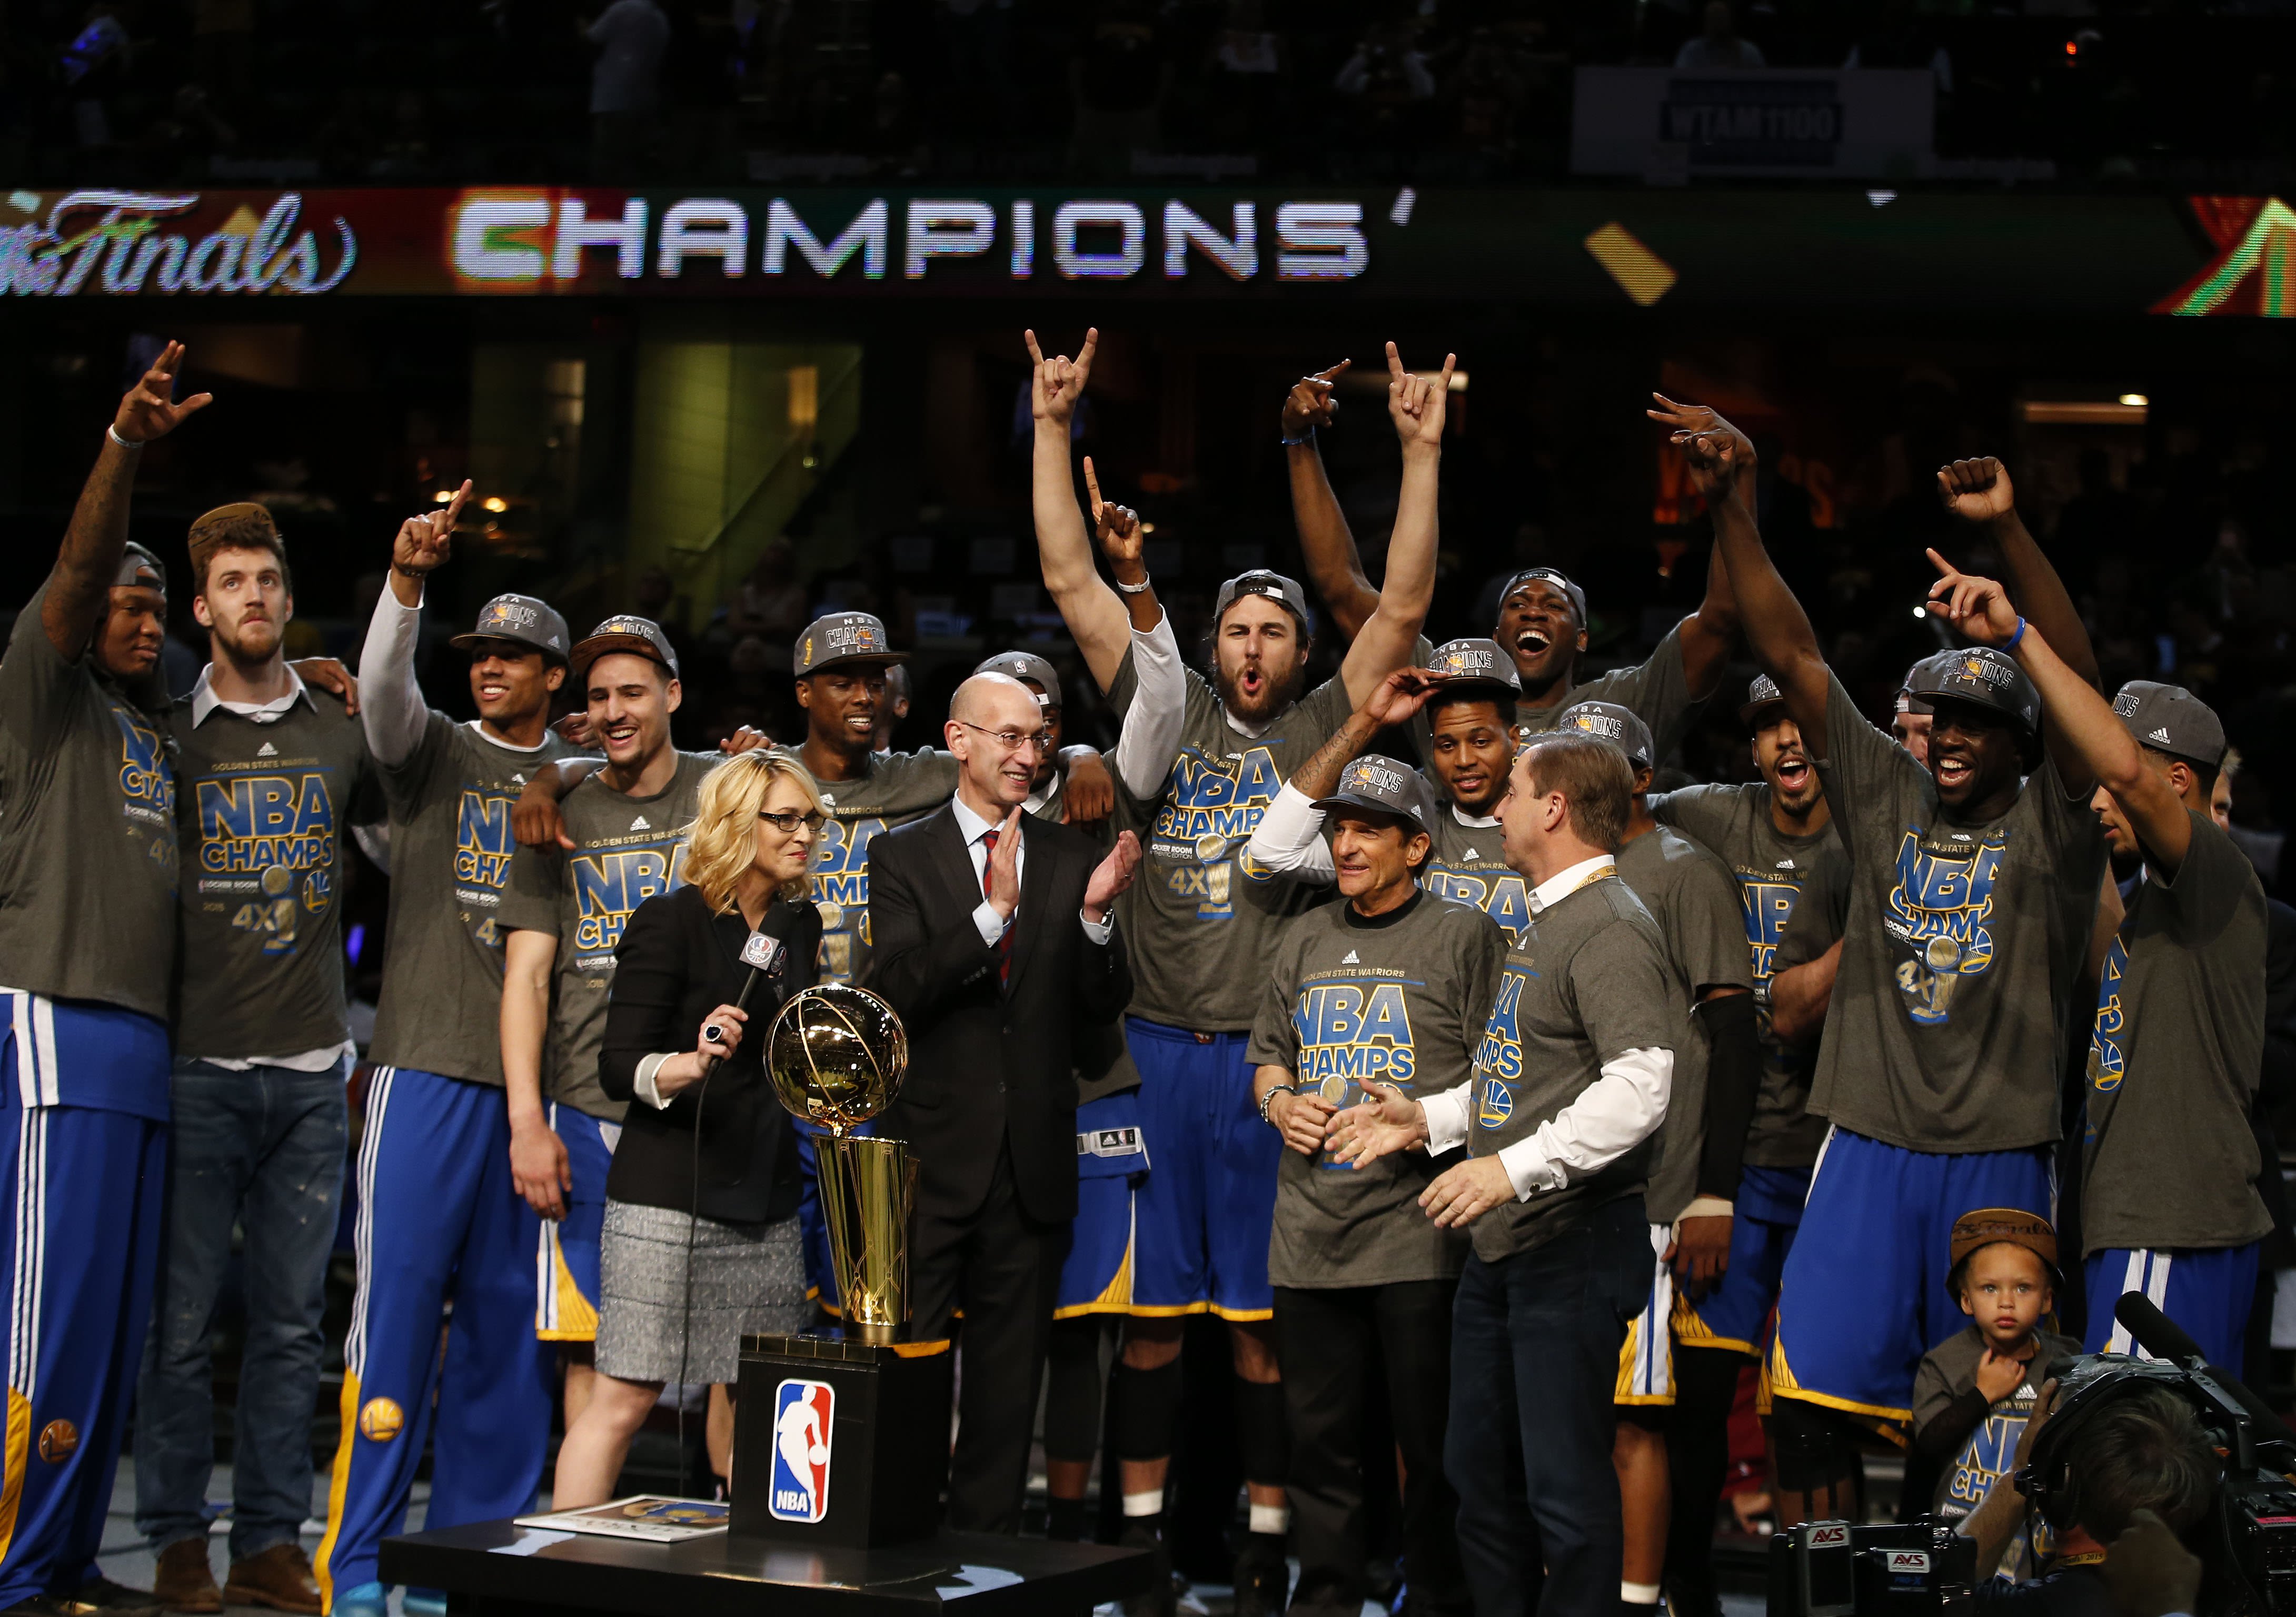 Warriors win NBA title, down LeBron, Cavs 105-97 in Game 6 - The